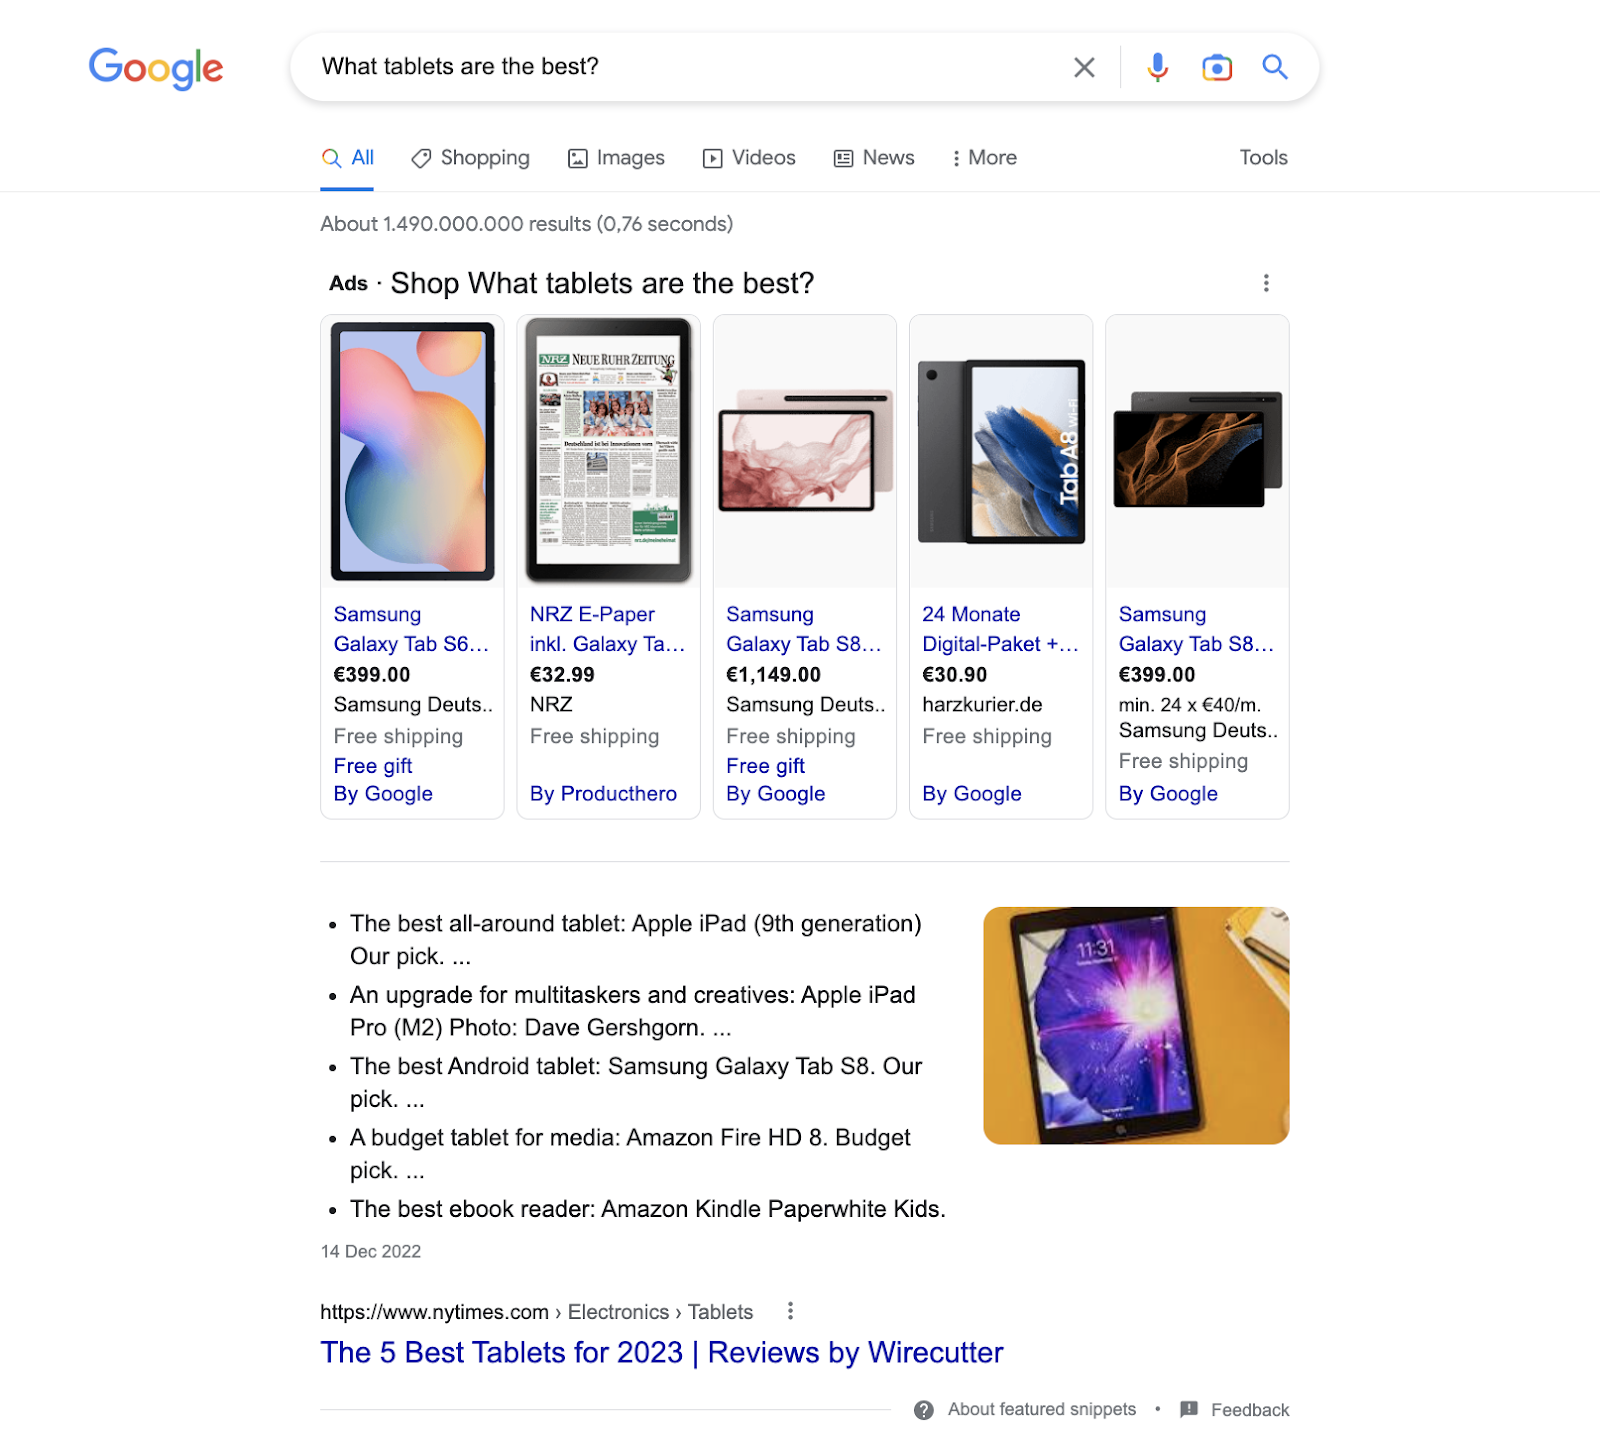 Google Search Engine Results Page for a Query with Commercial Intent